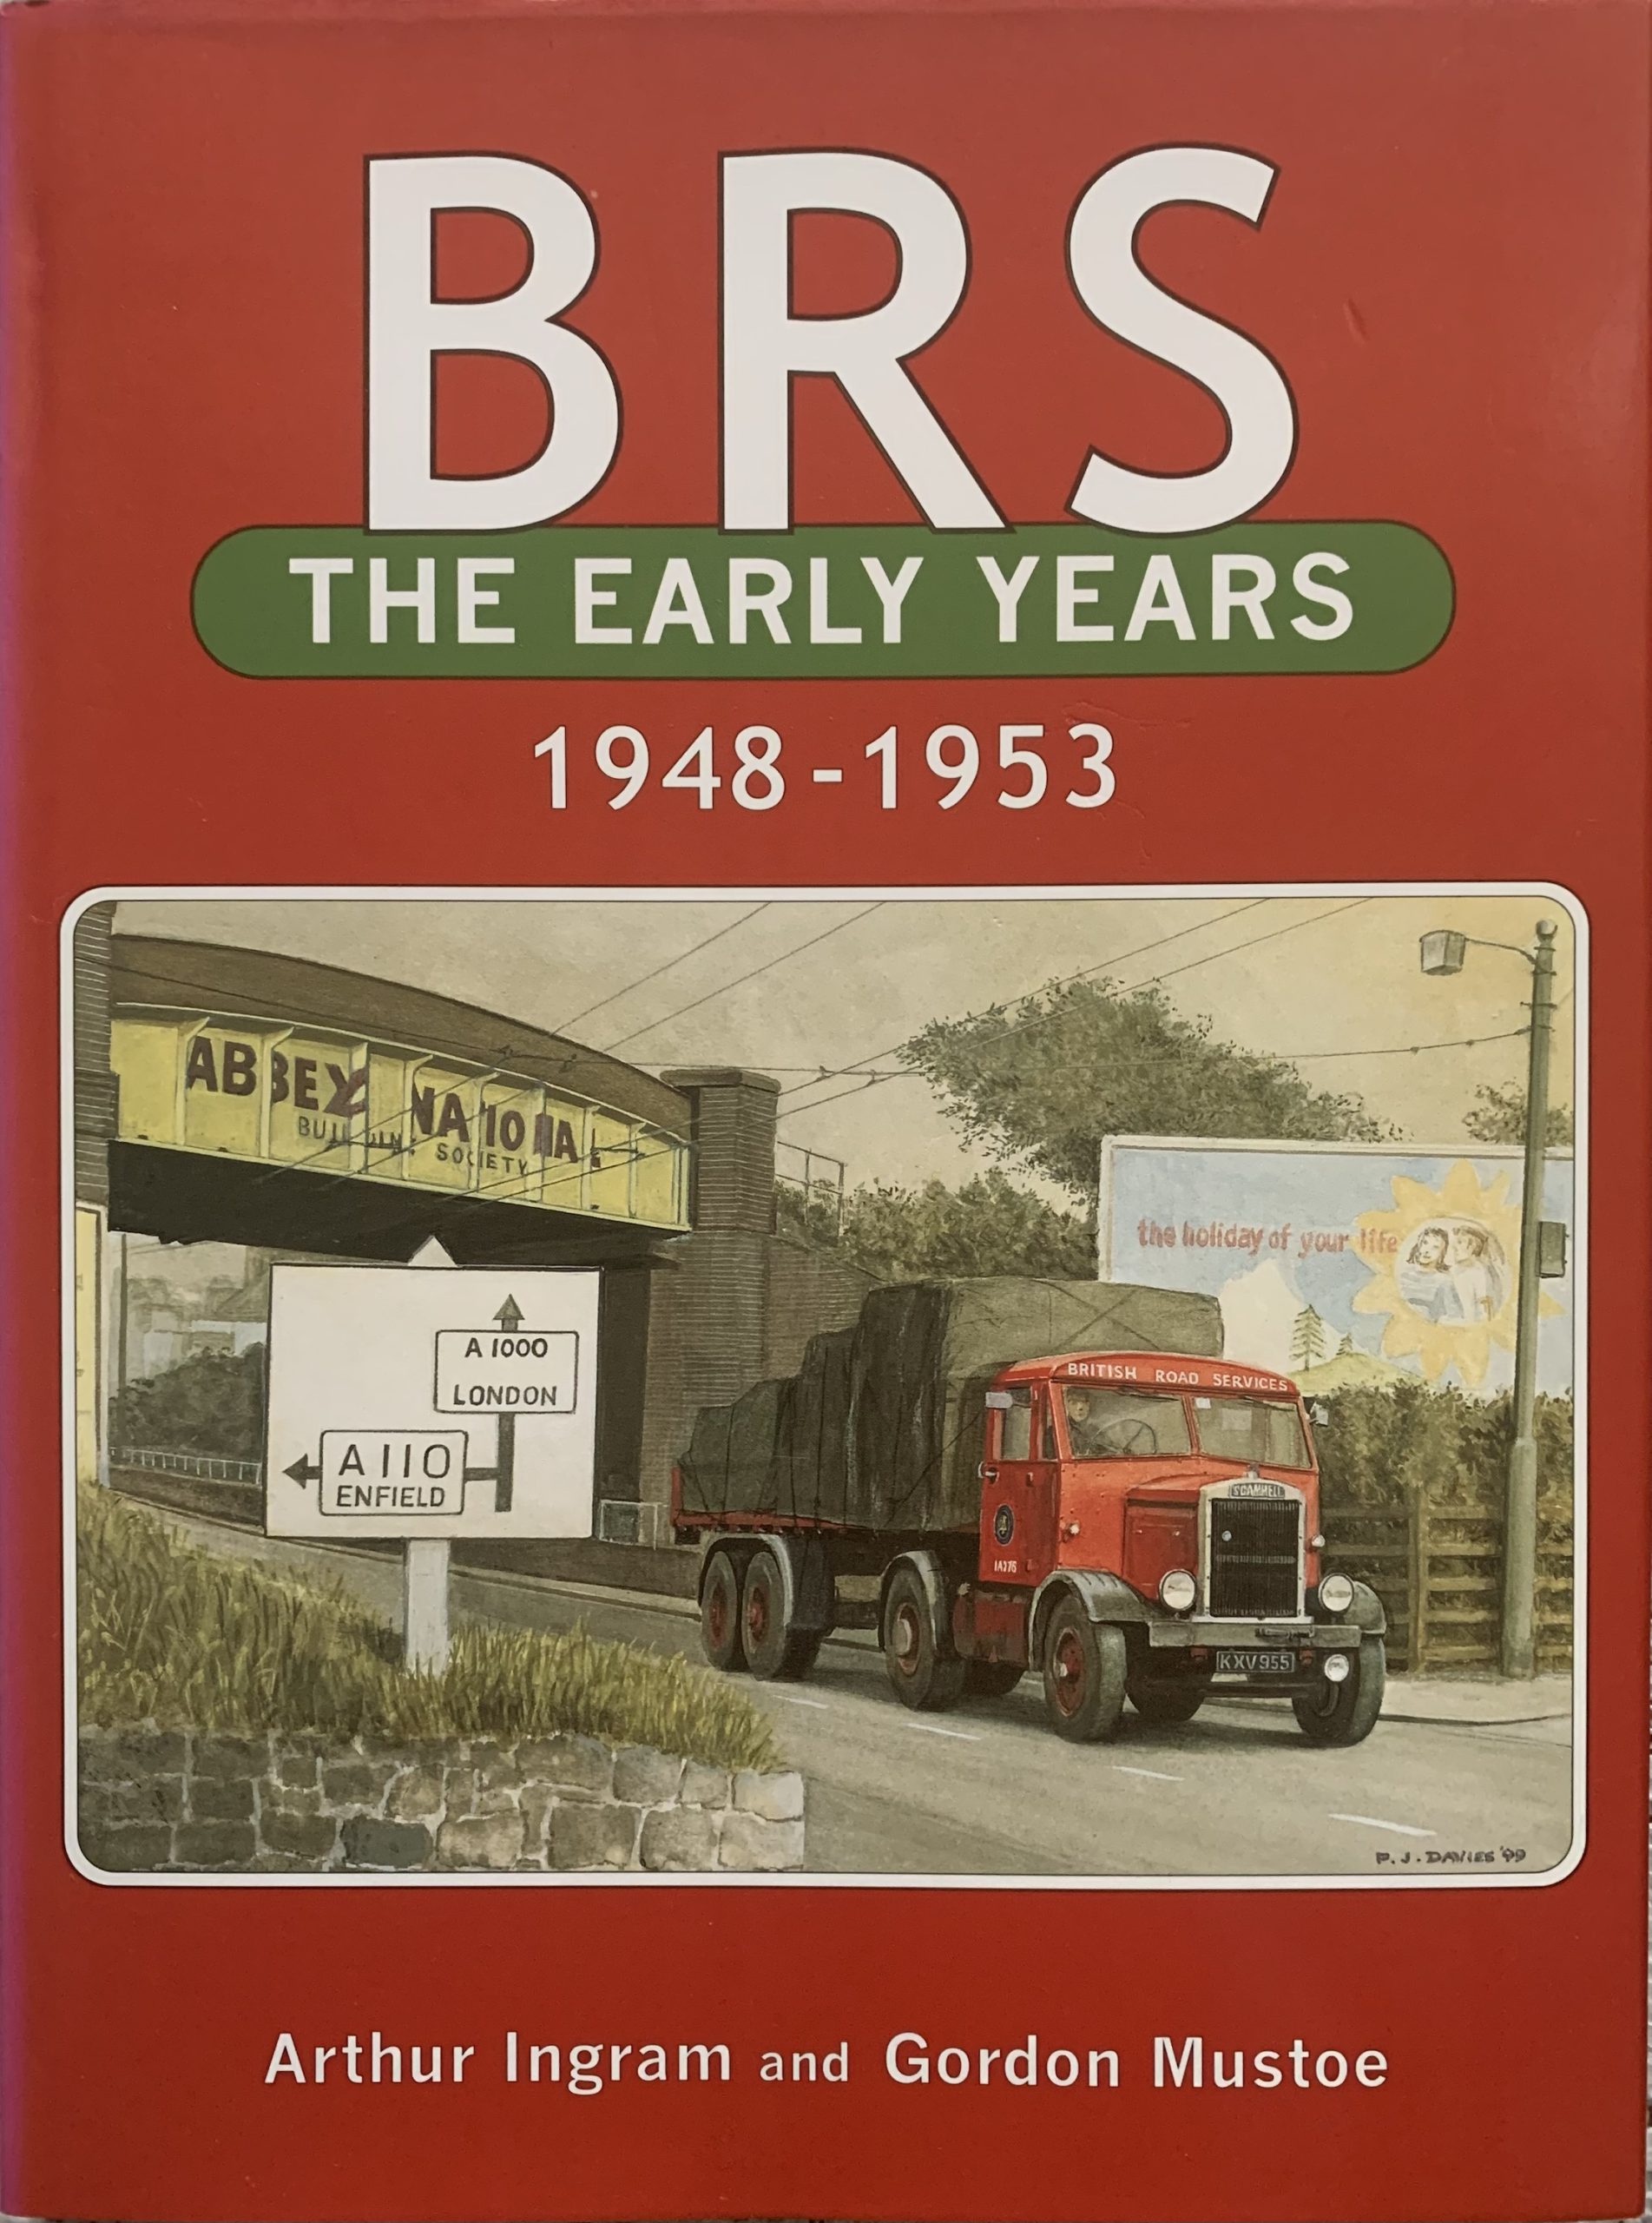 BRS: The Early Years 1948-1953 By Arthur Ingram and Gordon Mustoe